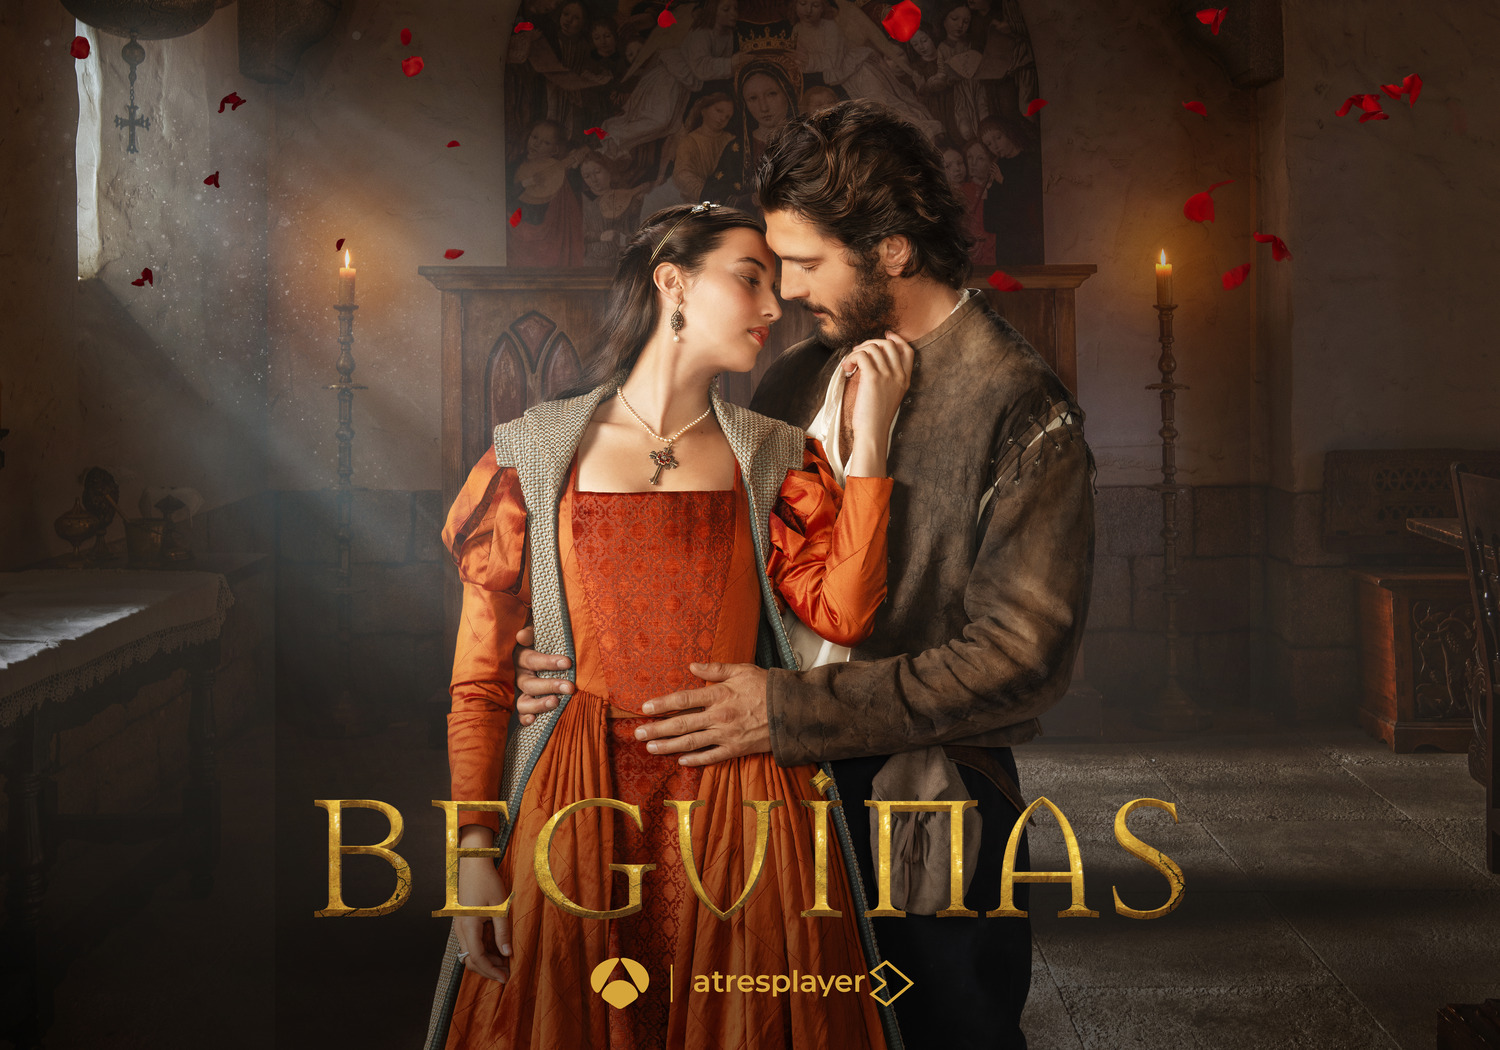 Extra Large TV Poster Image for Beguinas 